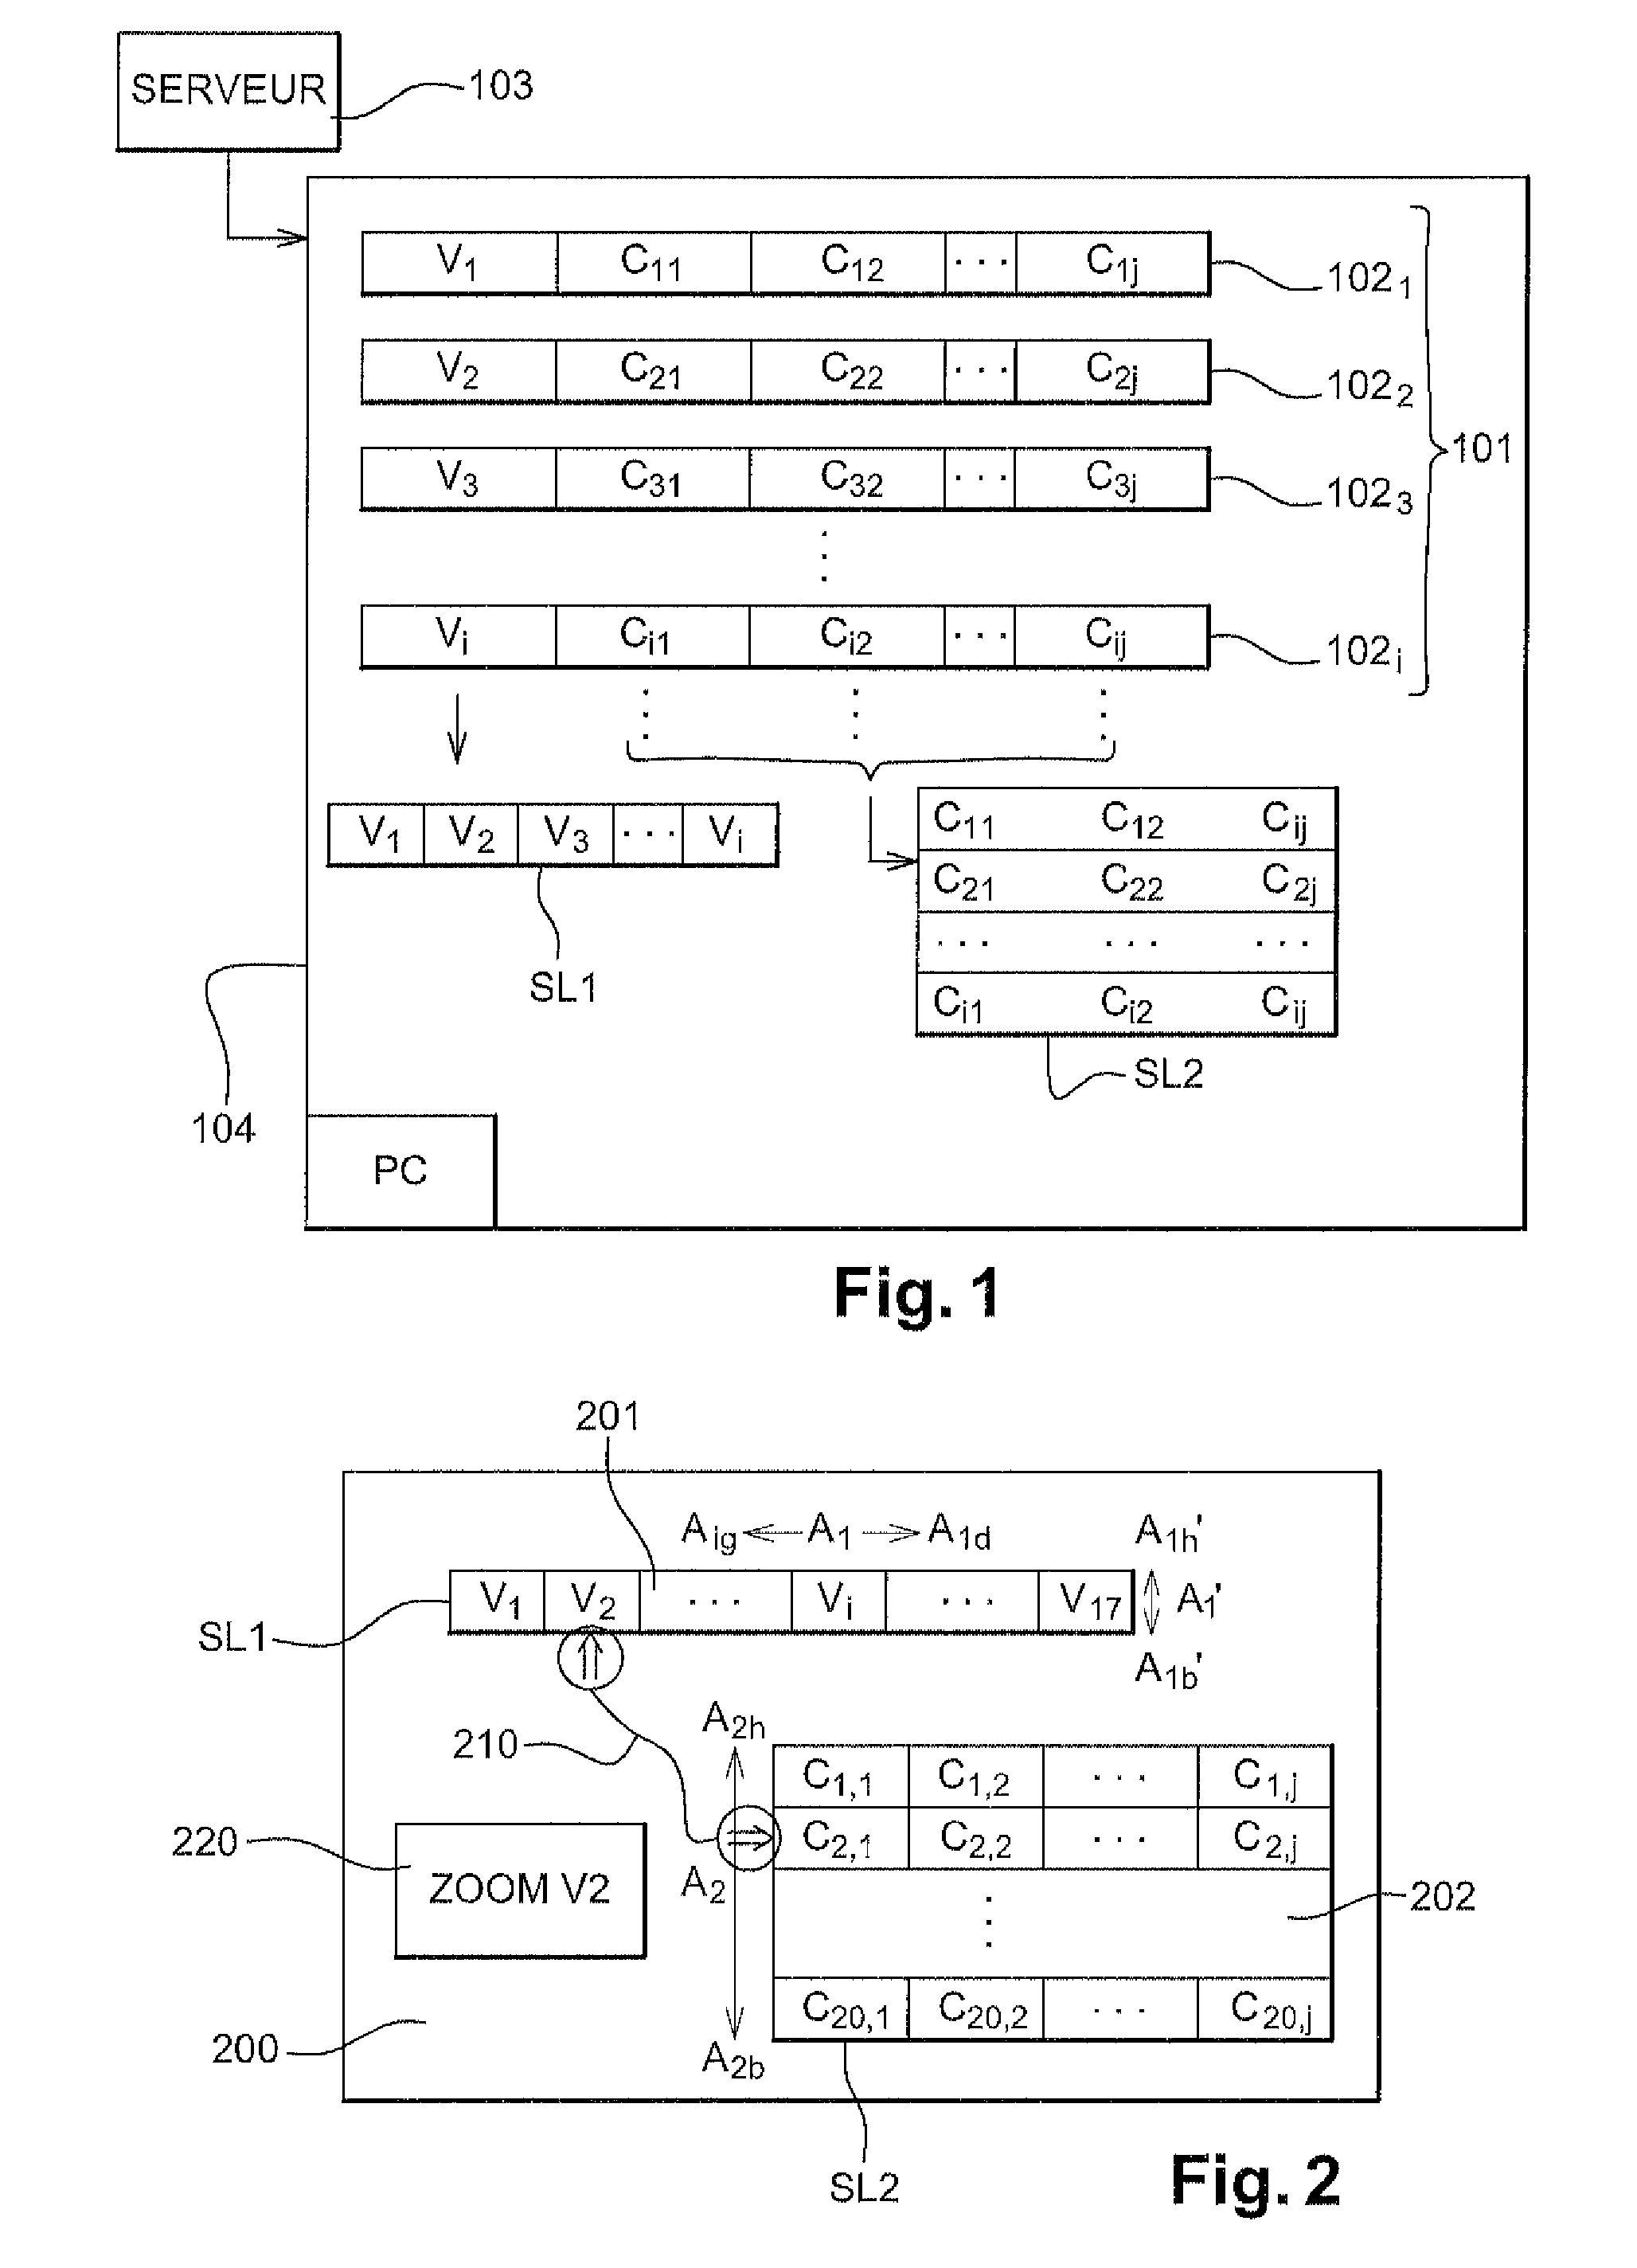 Method for navigating within a search result obtained by means of a search engine